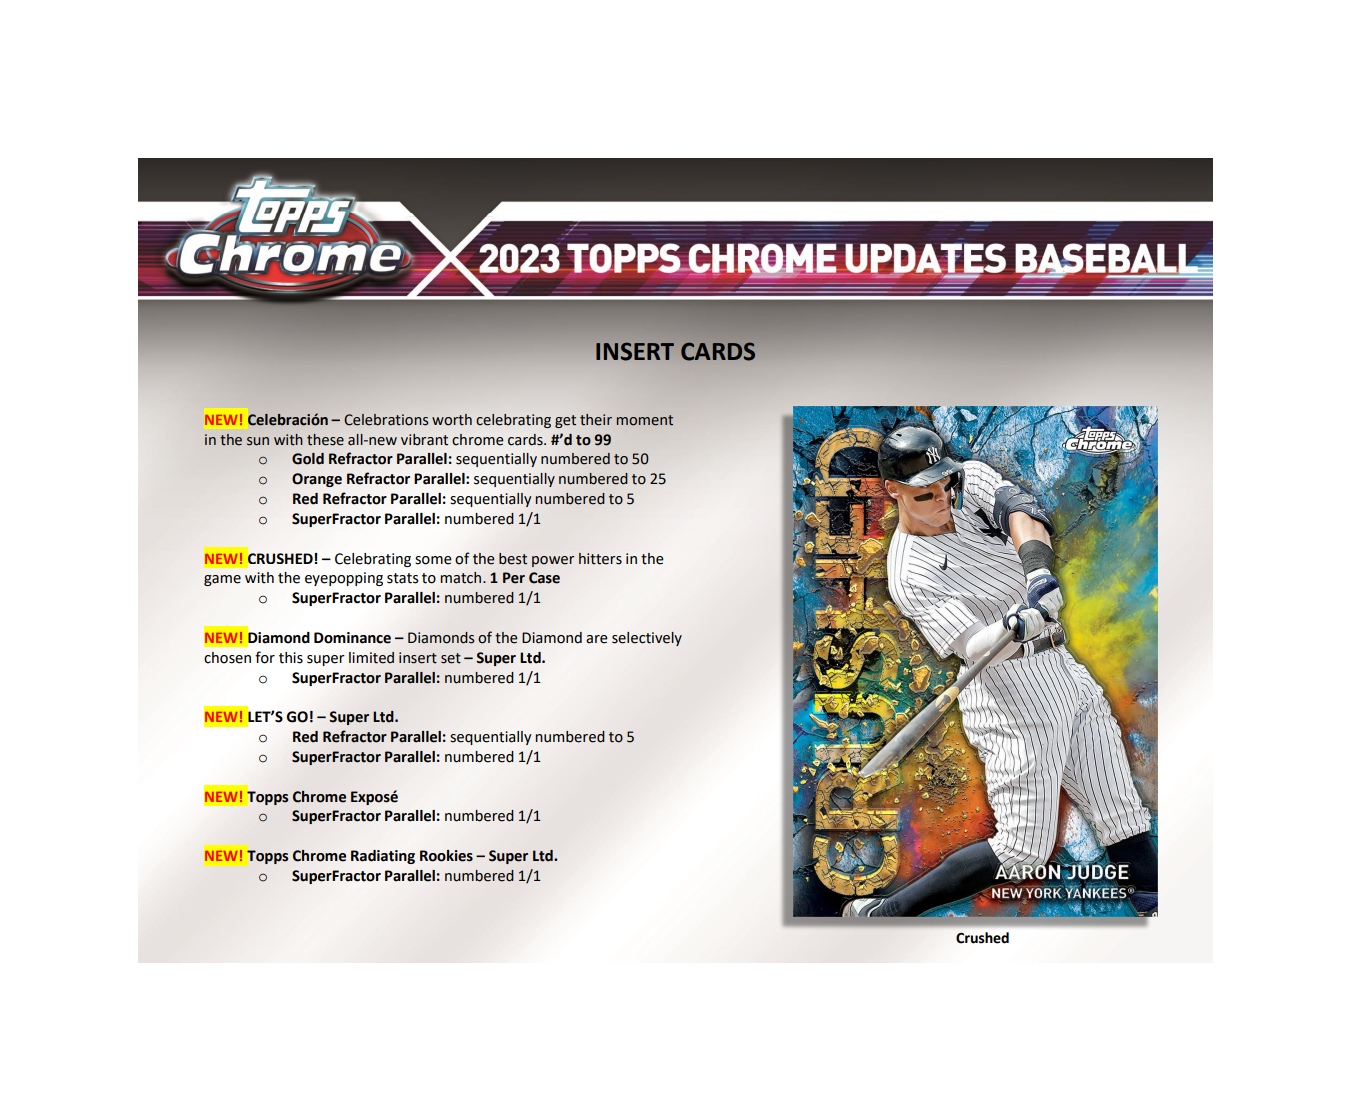 MLB Debut Patch Cards to Debut in 2023 Topps Chrome Updates